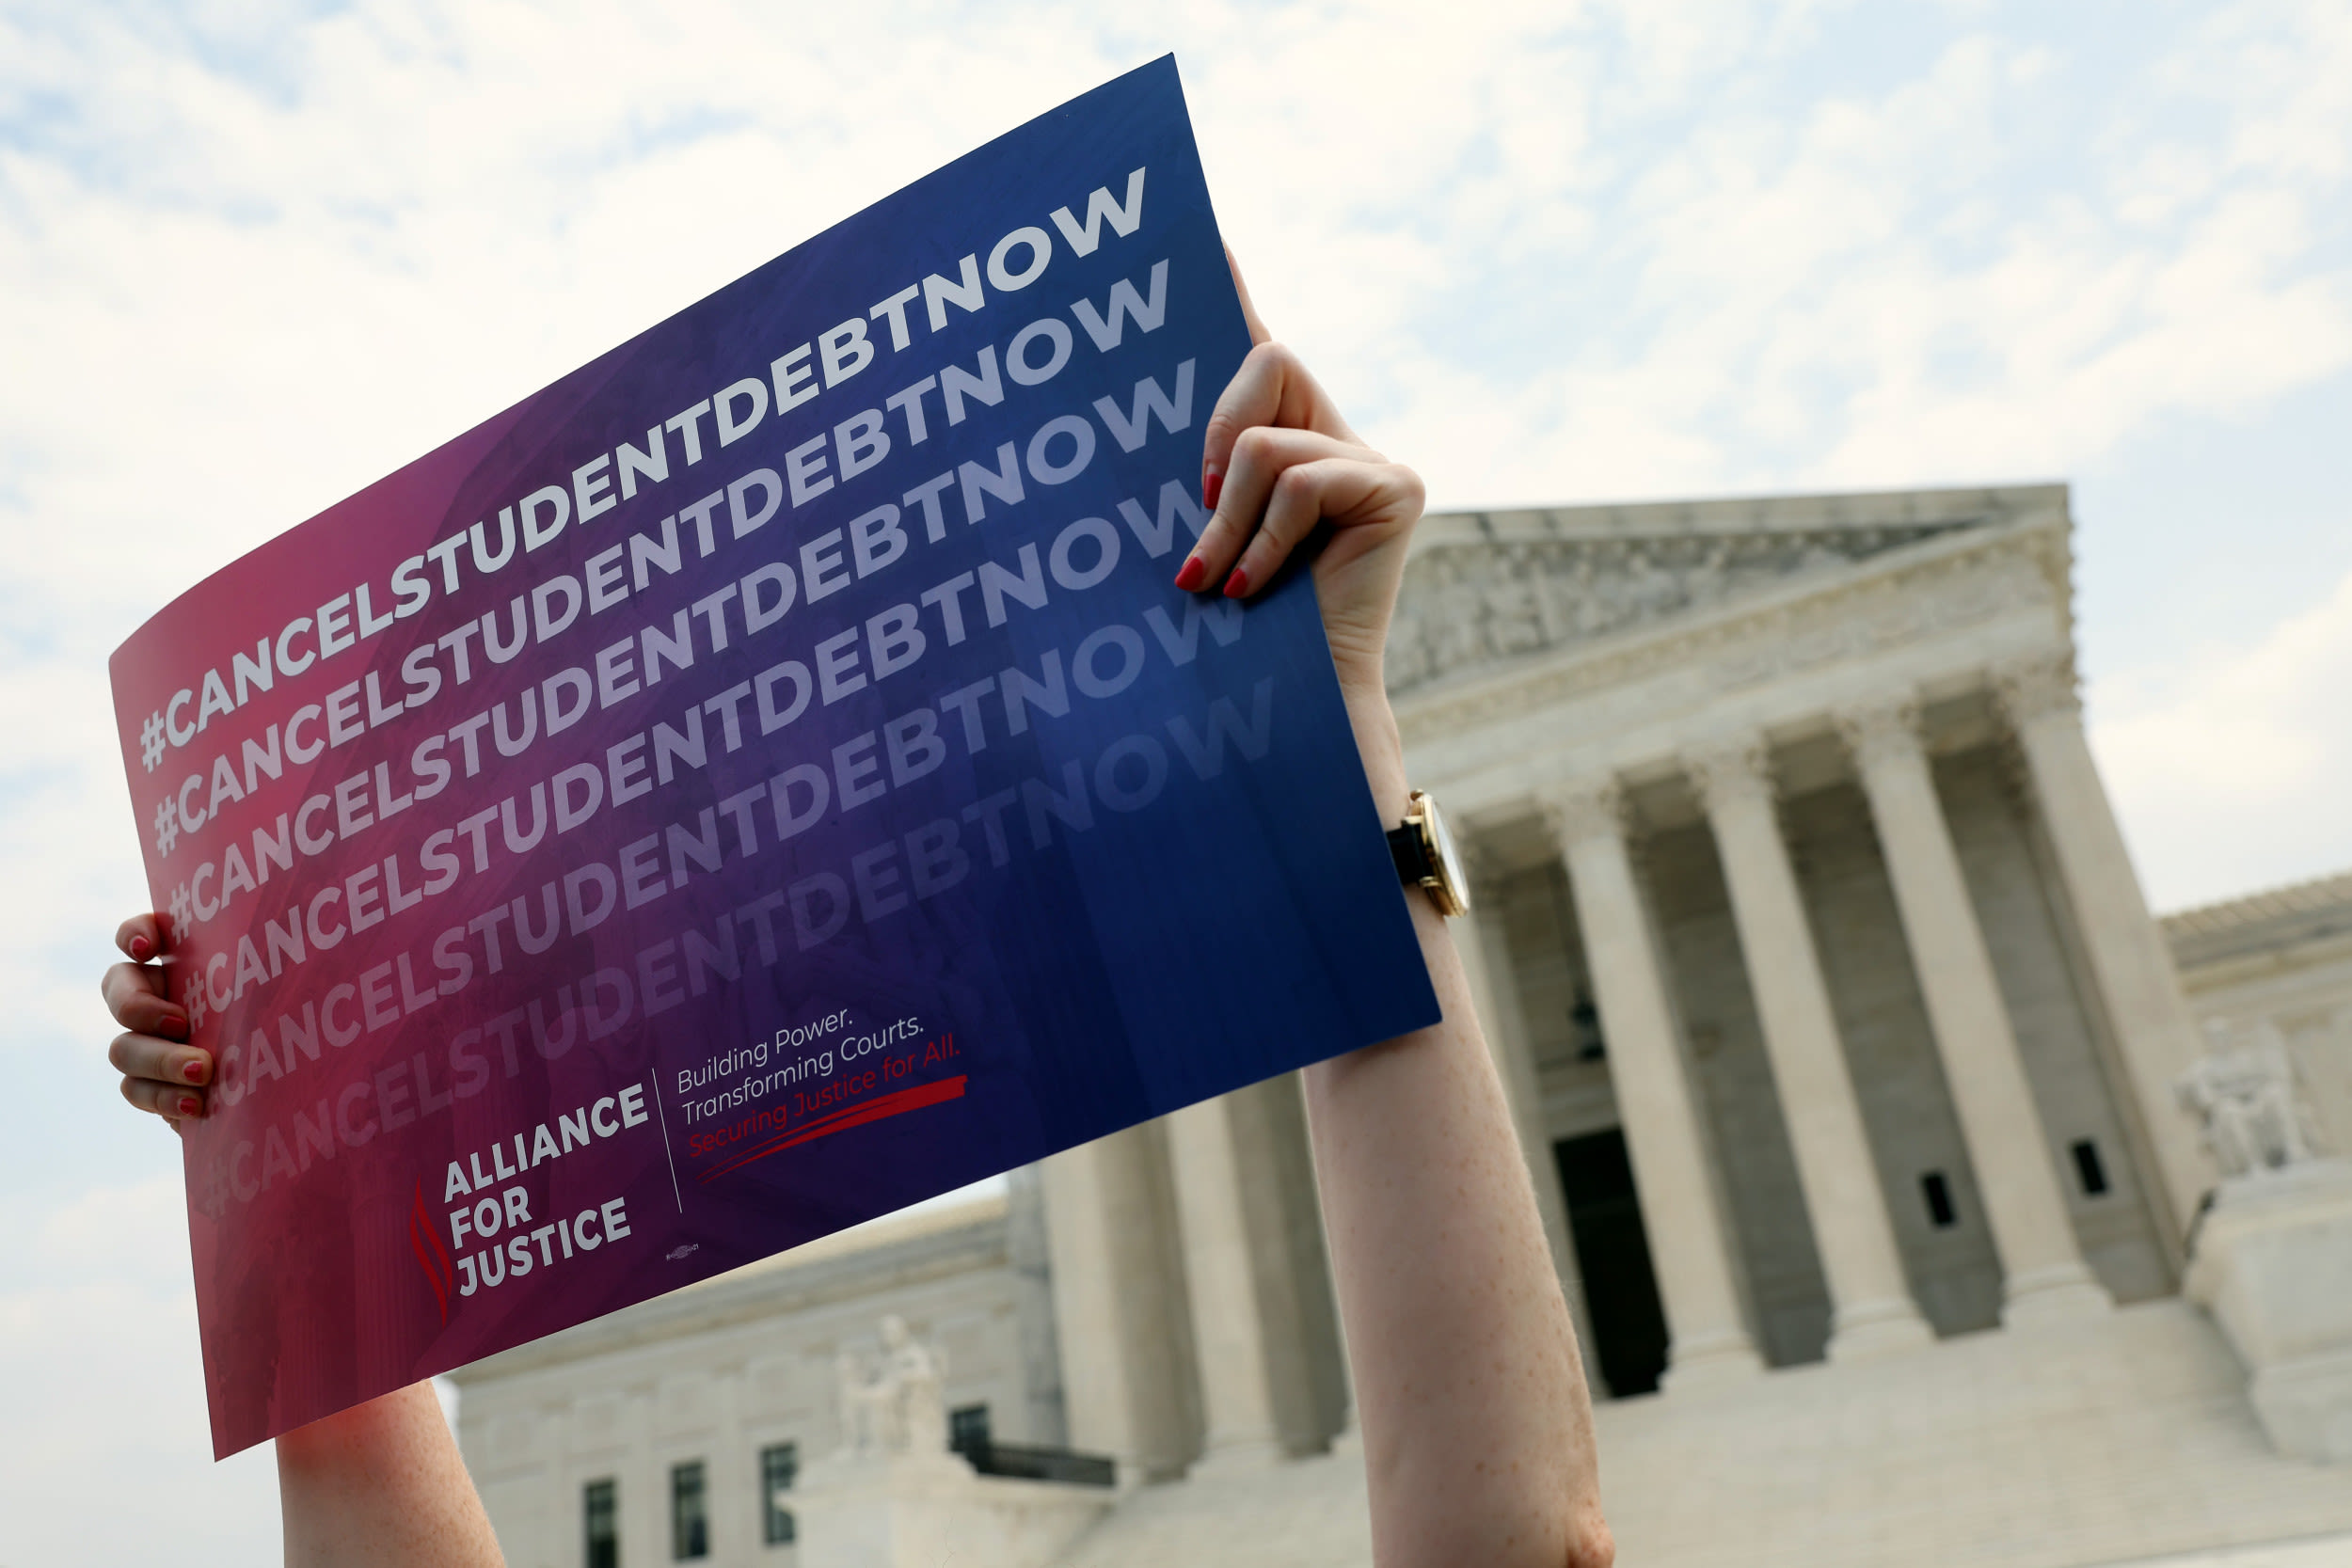 Student Loan Forgiveness Update: What New Court Ruling Means for Payments